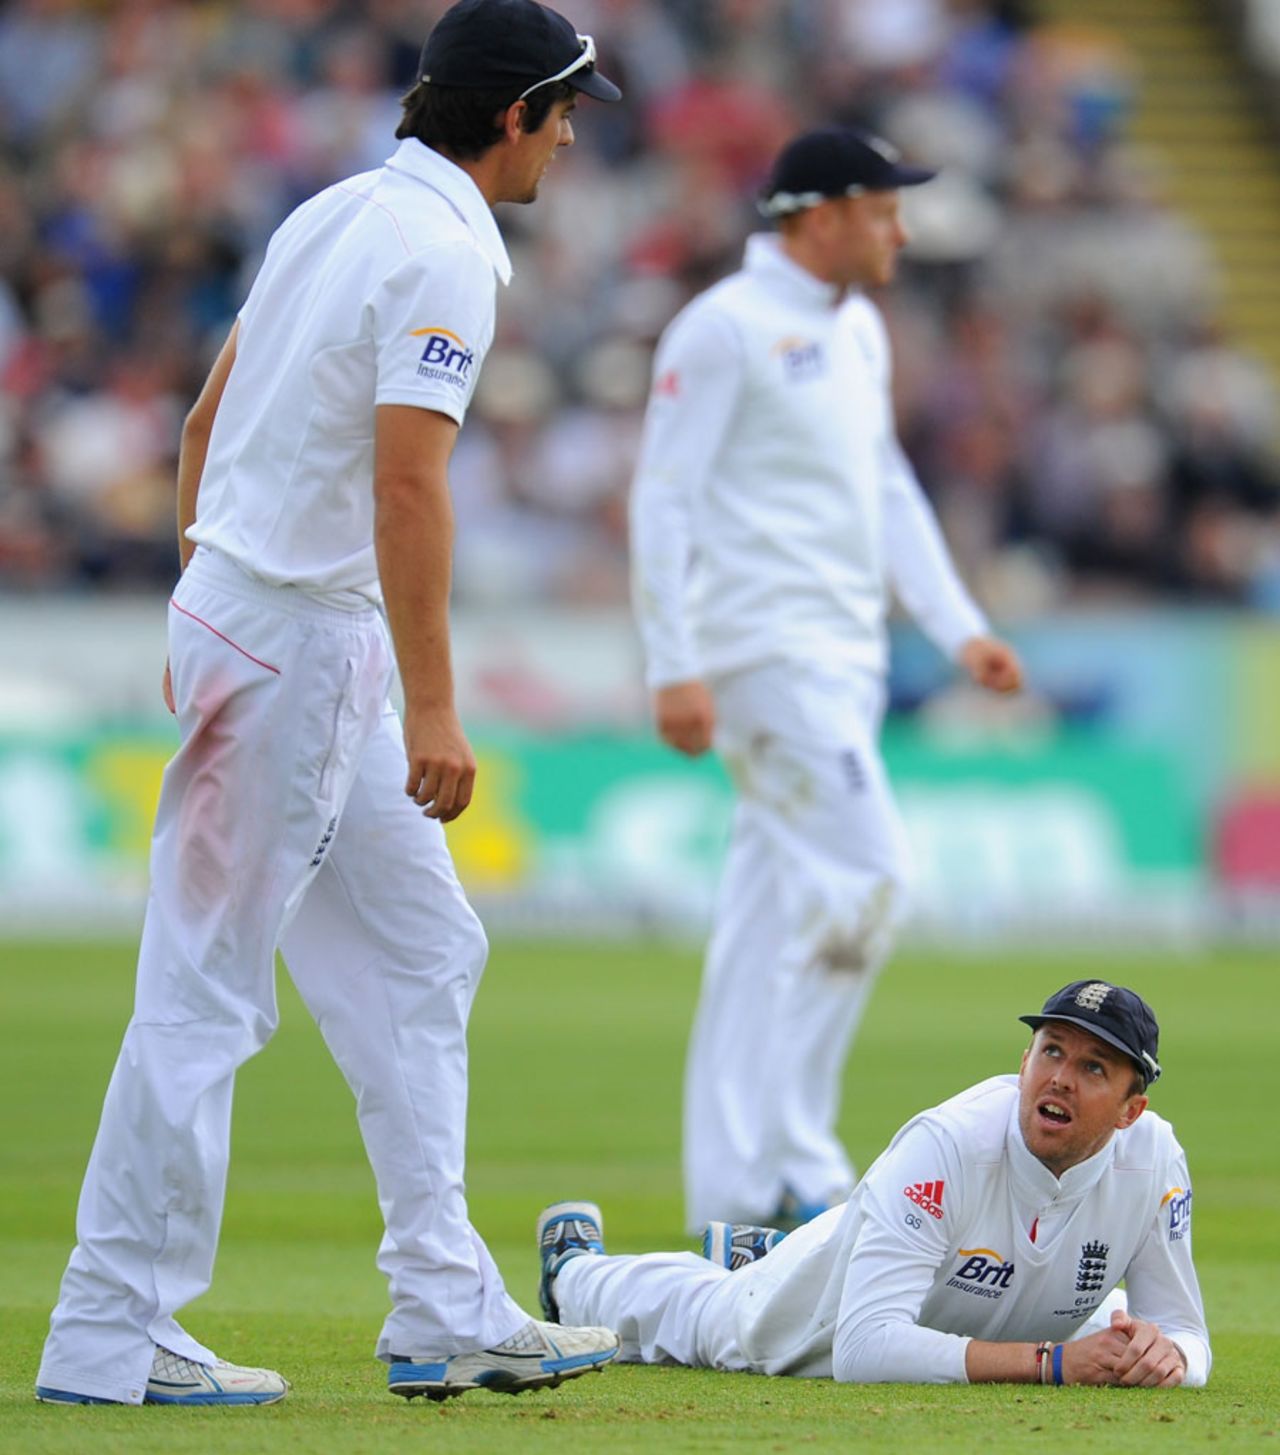 Graeme Swann was unable to take a tough slip chance, England v Australia, 4th Investec Ashes Test, 2nd day, Chester-le-Street, August 10, 2013